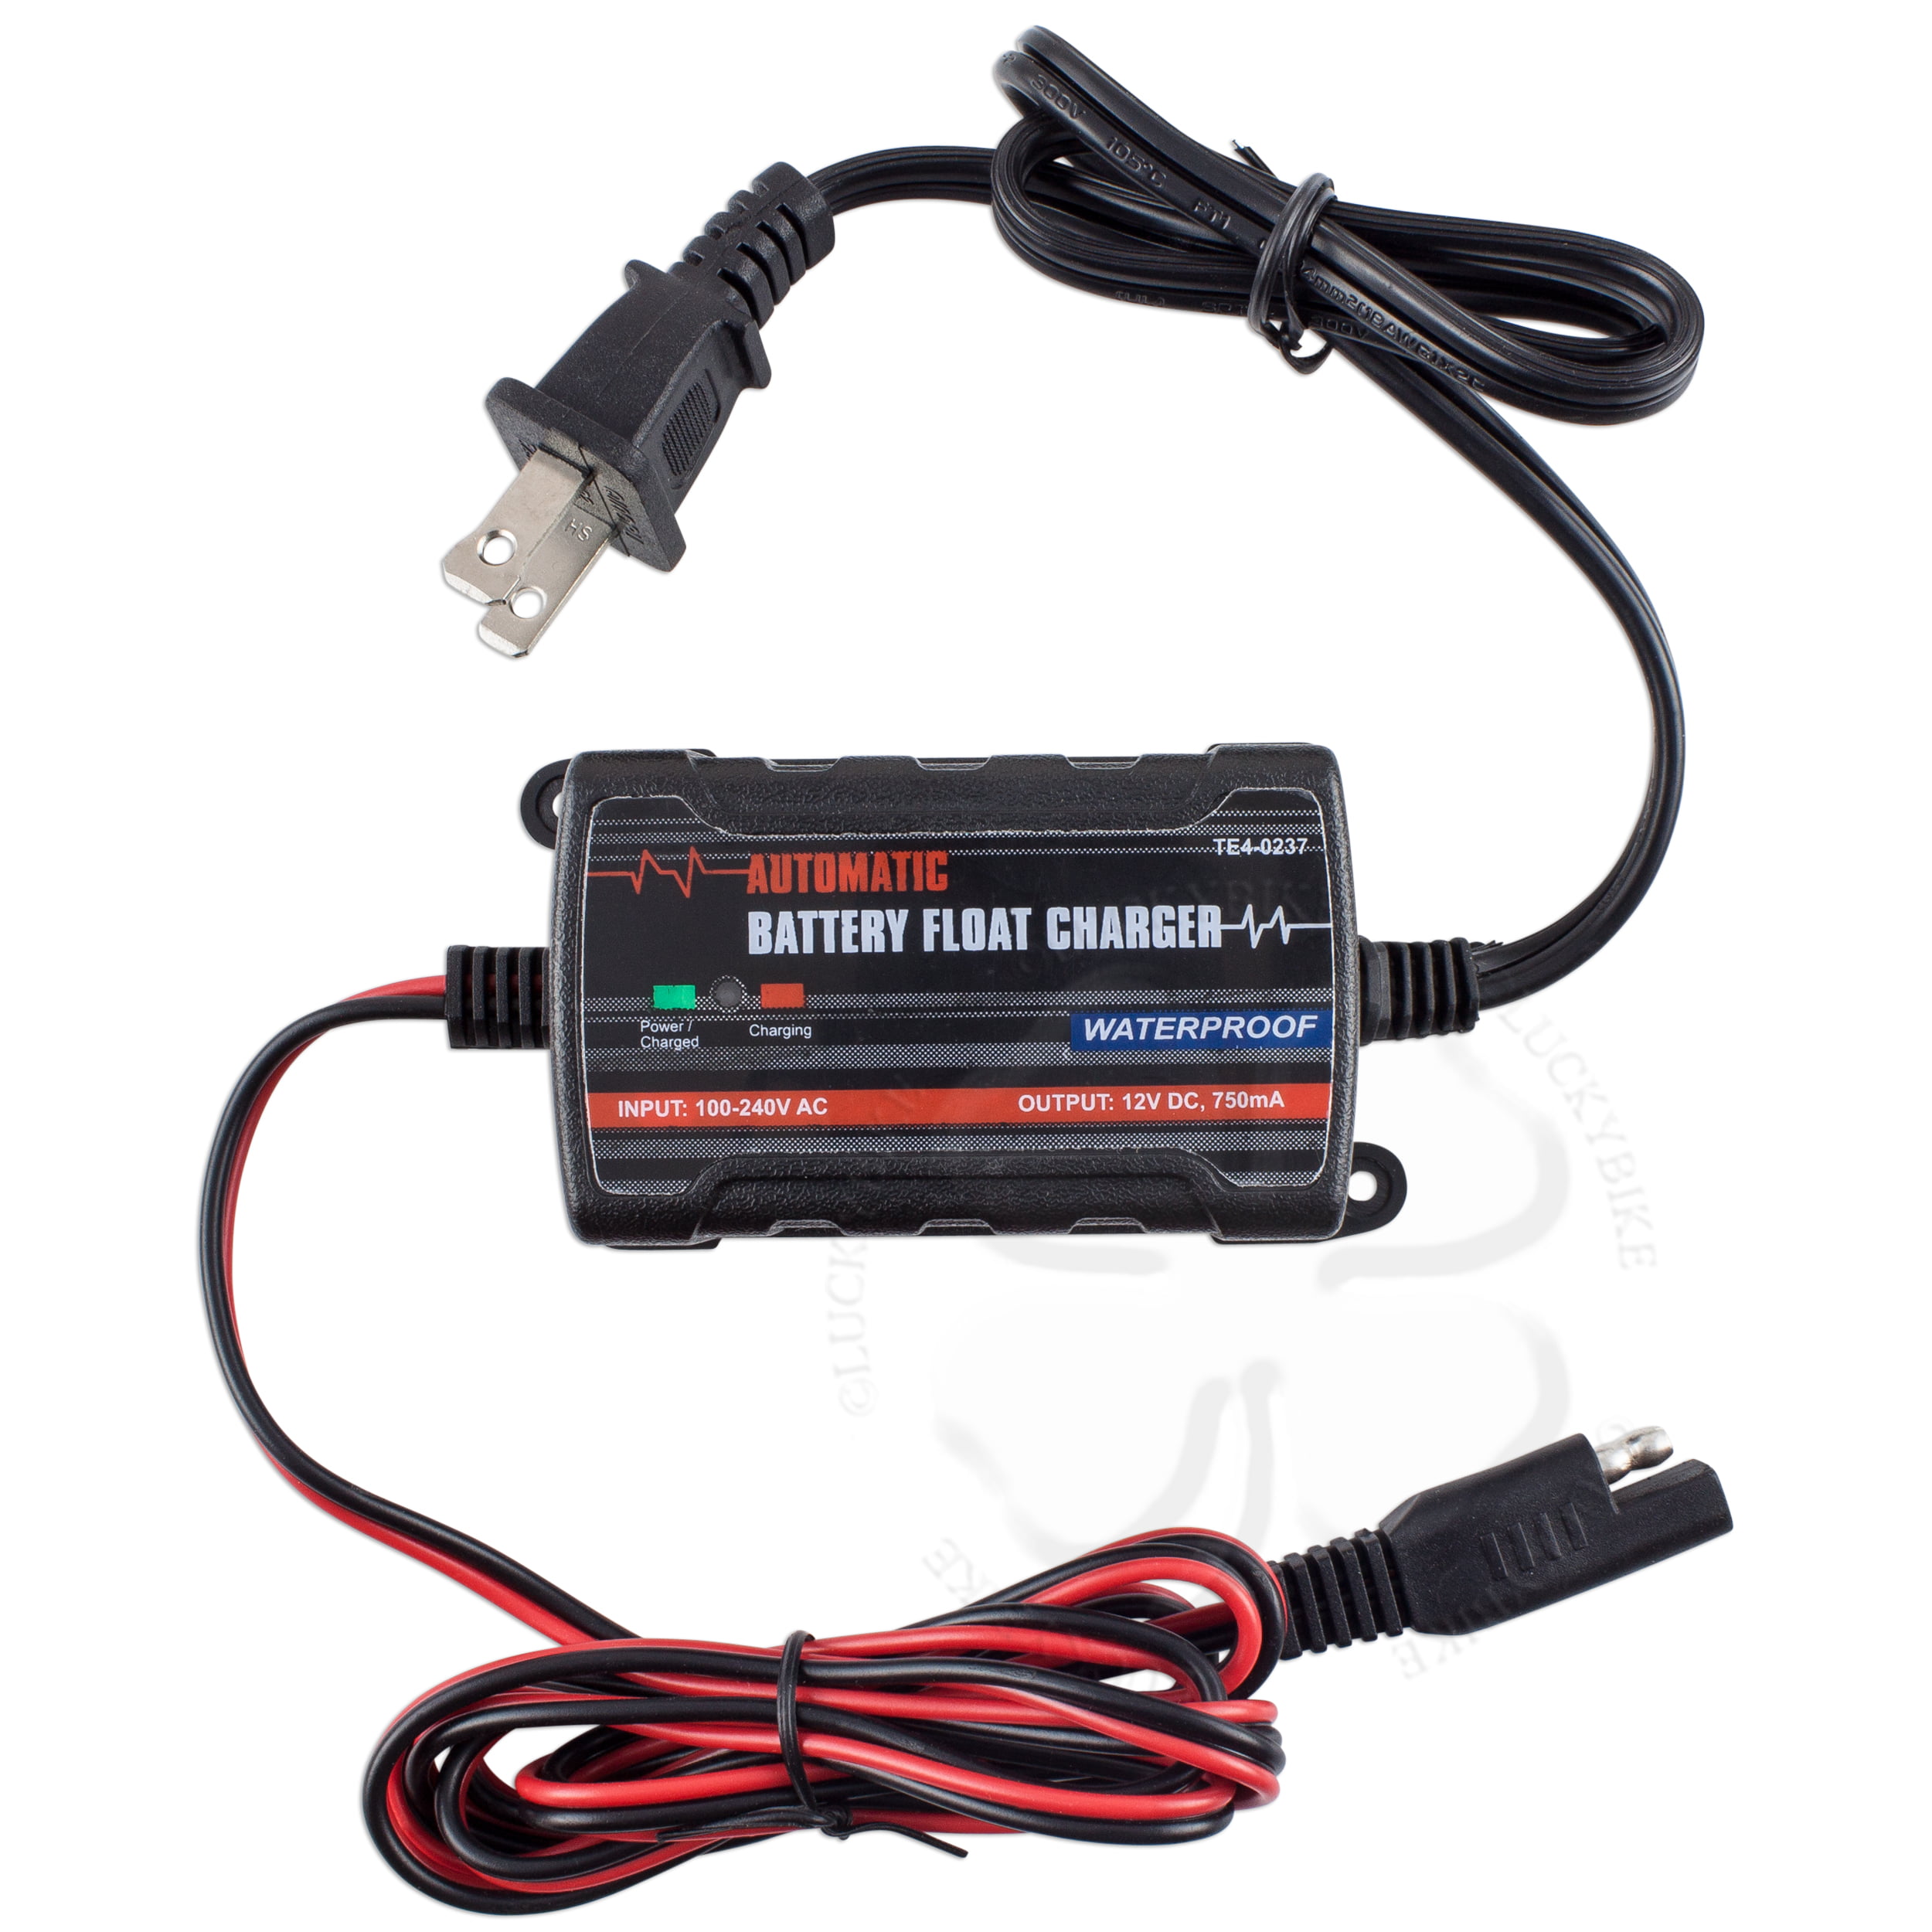 Car Auto Motorcycle Battery Charger Float Trickle Tender Maintainer 12V 